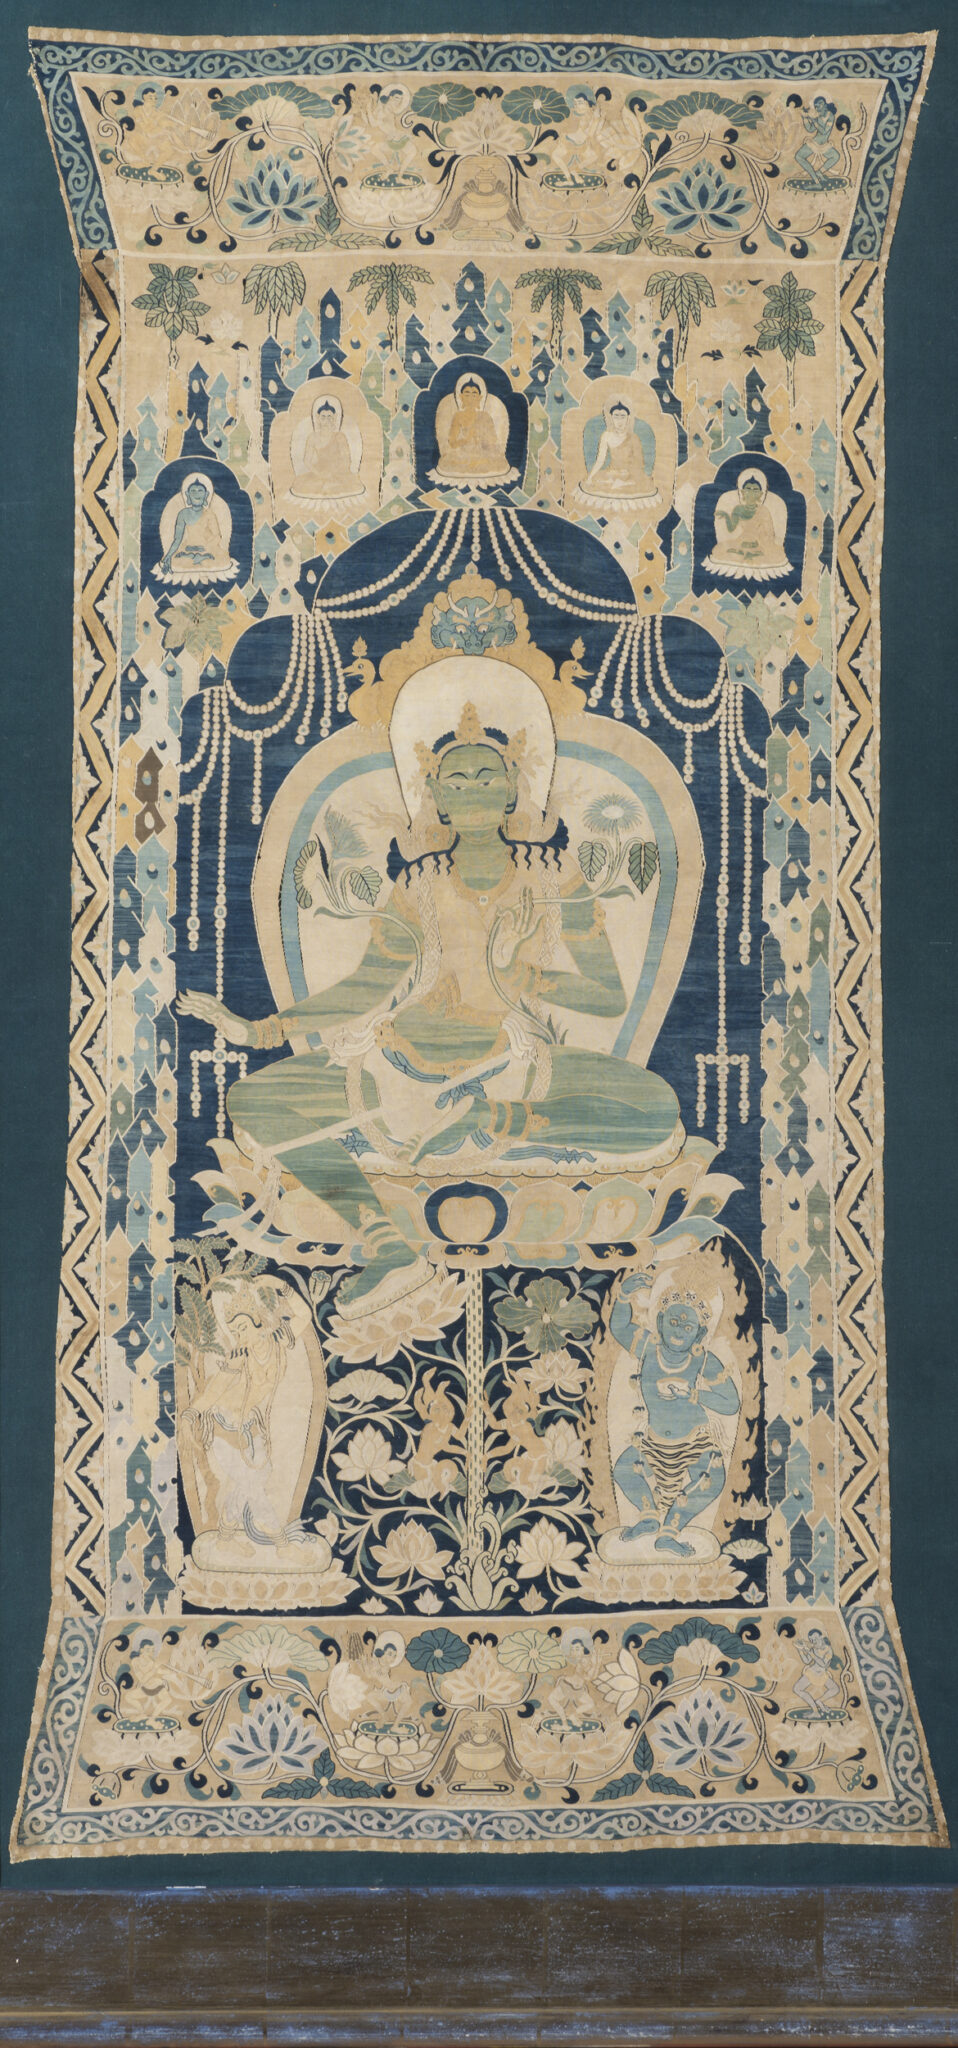 Green-skinned goddess seated underneath arched structure bearing deity portraits and floral motifs in light blues